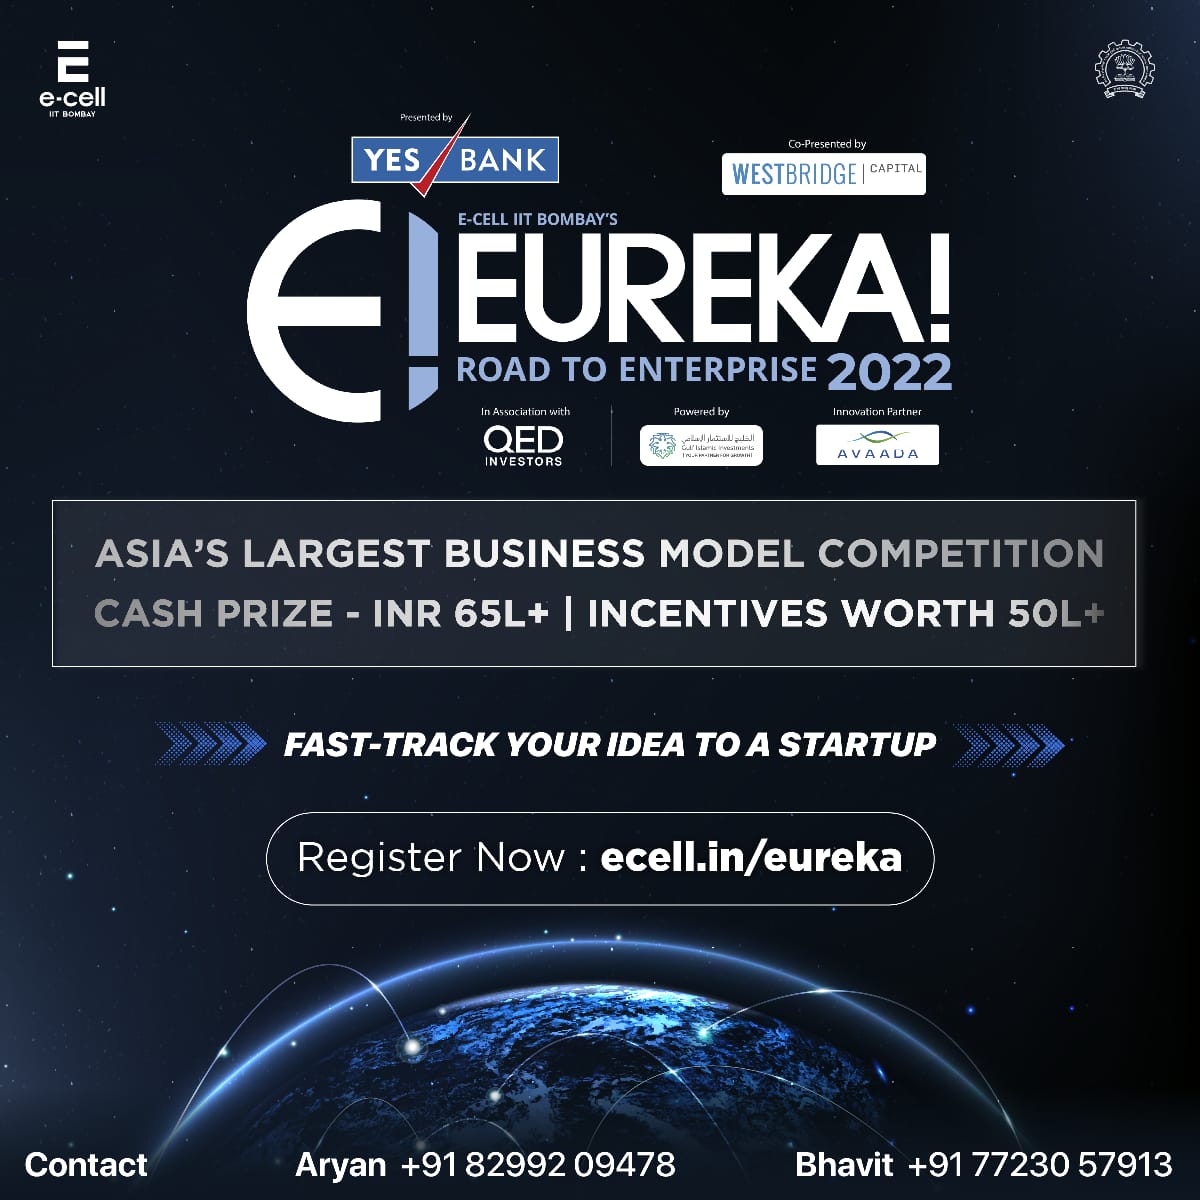 e-cell-iit-bombay-s-eureka-2022-road-to-success